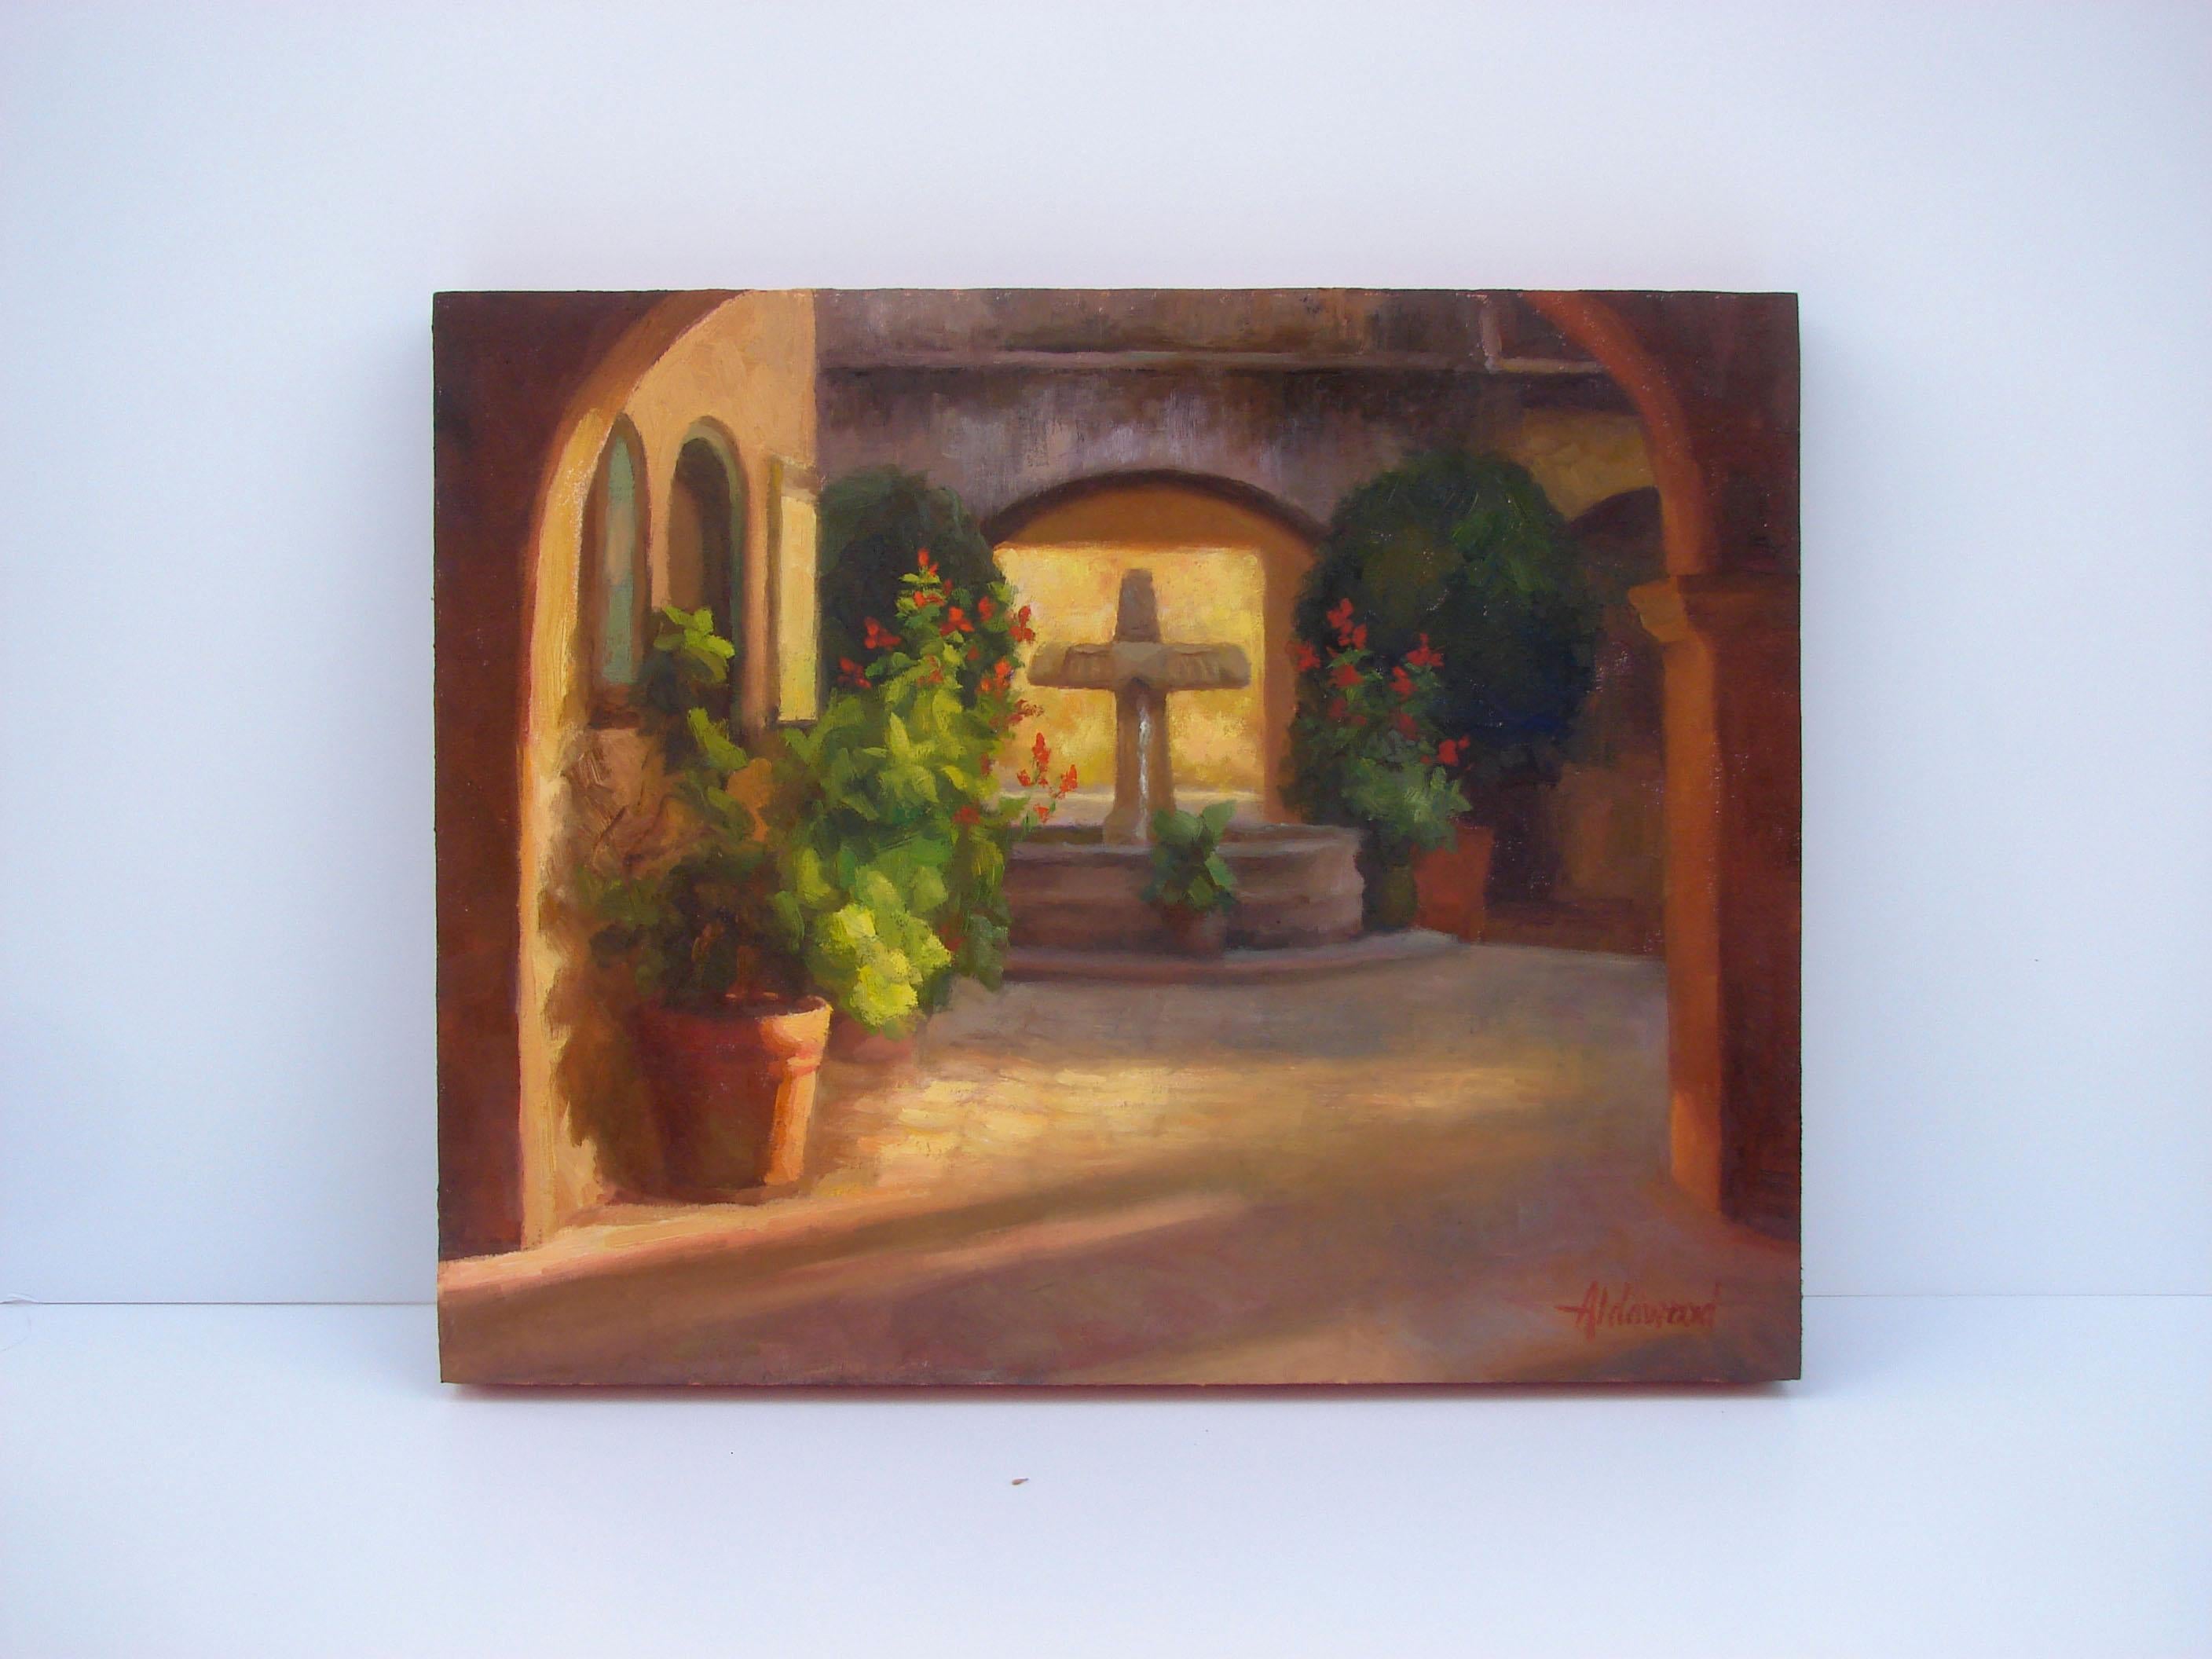 <p>Artist Comments<br />Artist Sherri Aldawood captured the morning sunlight falling across a courtyard in Tlaquepaque in Sedona, AZ. During the day, the outdoor market bustles with visitors from all over the world. Sherri chose this early moment in